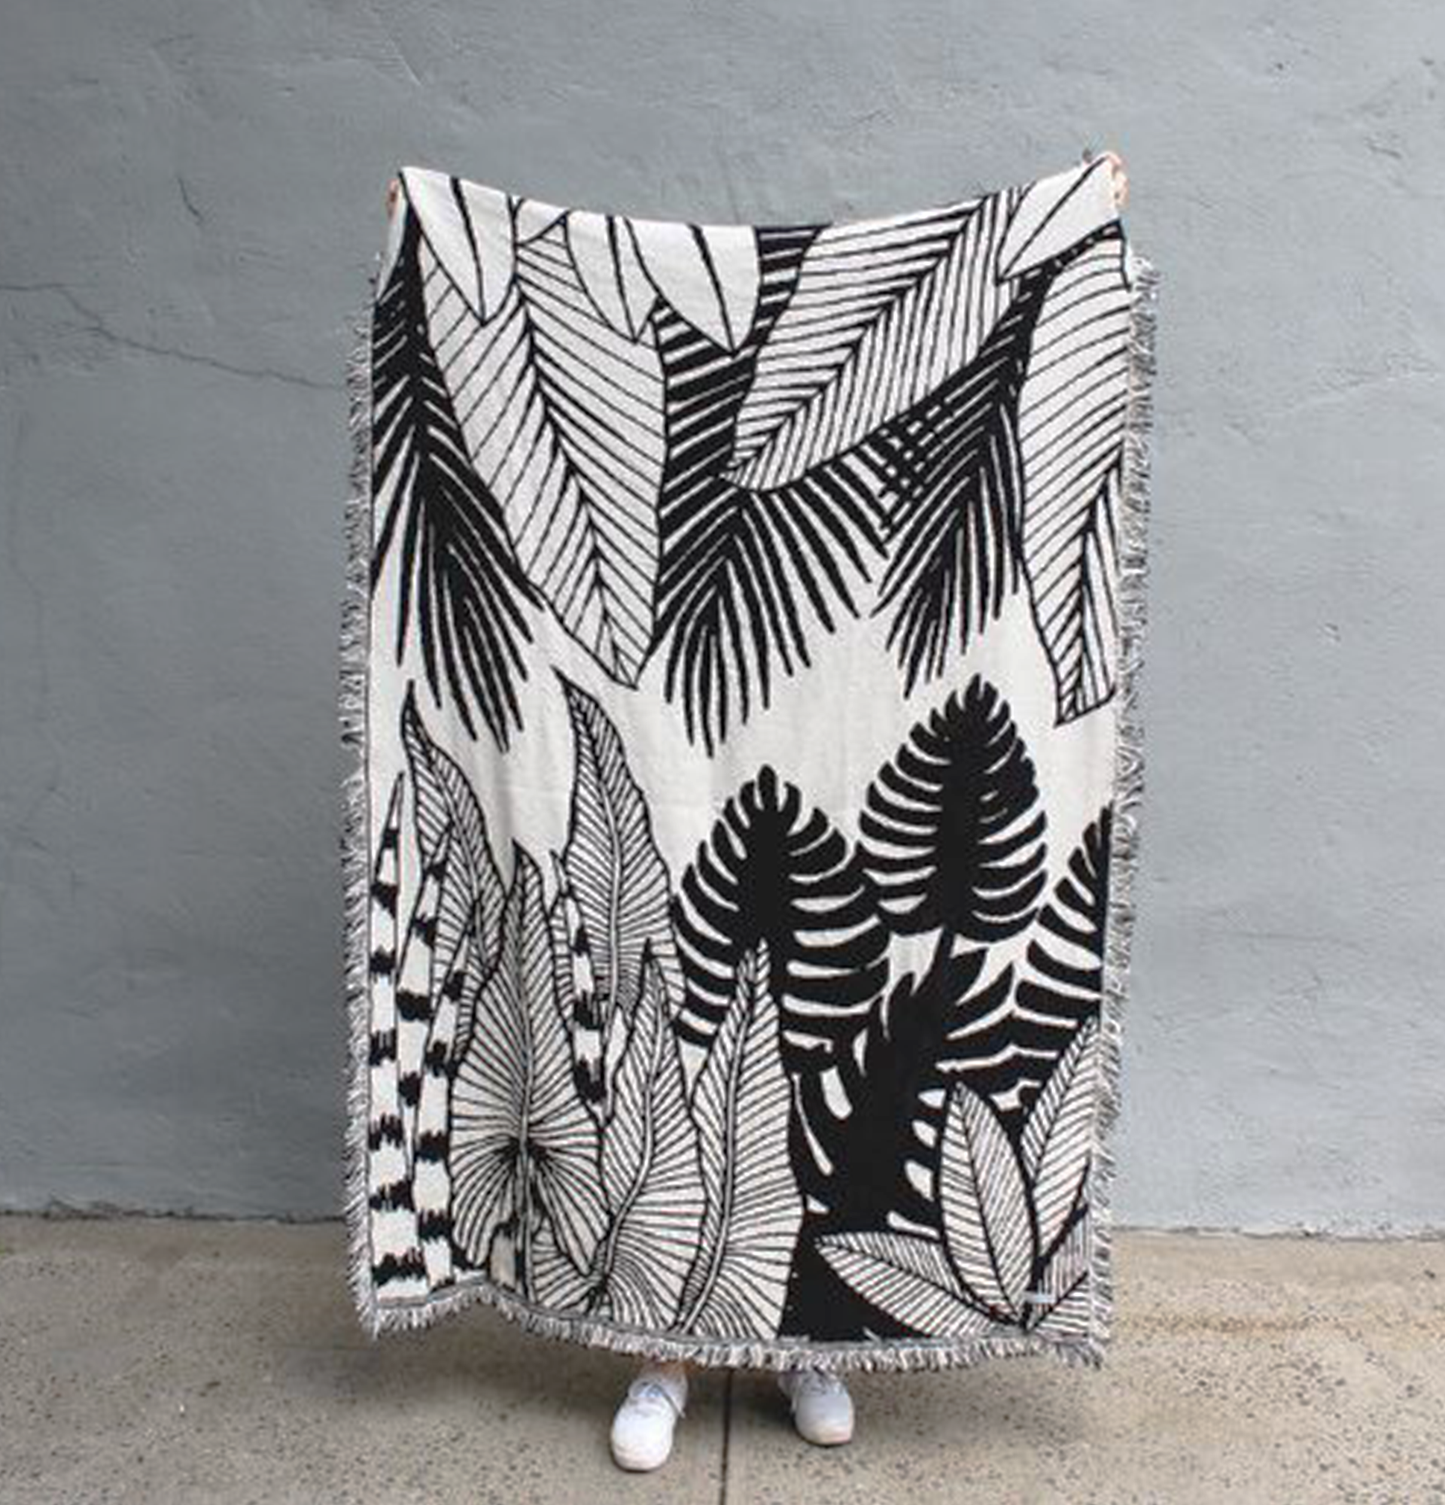 Black and white double-sided jungle sand rug